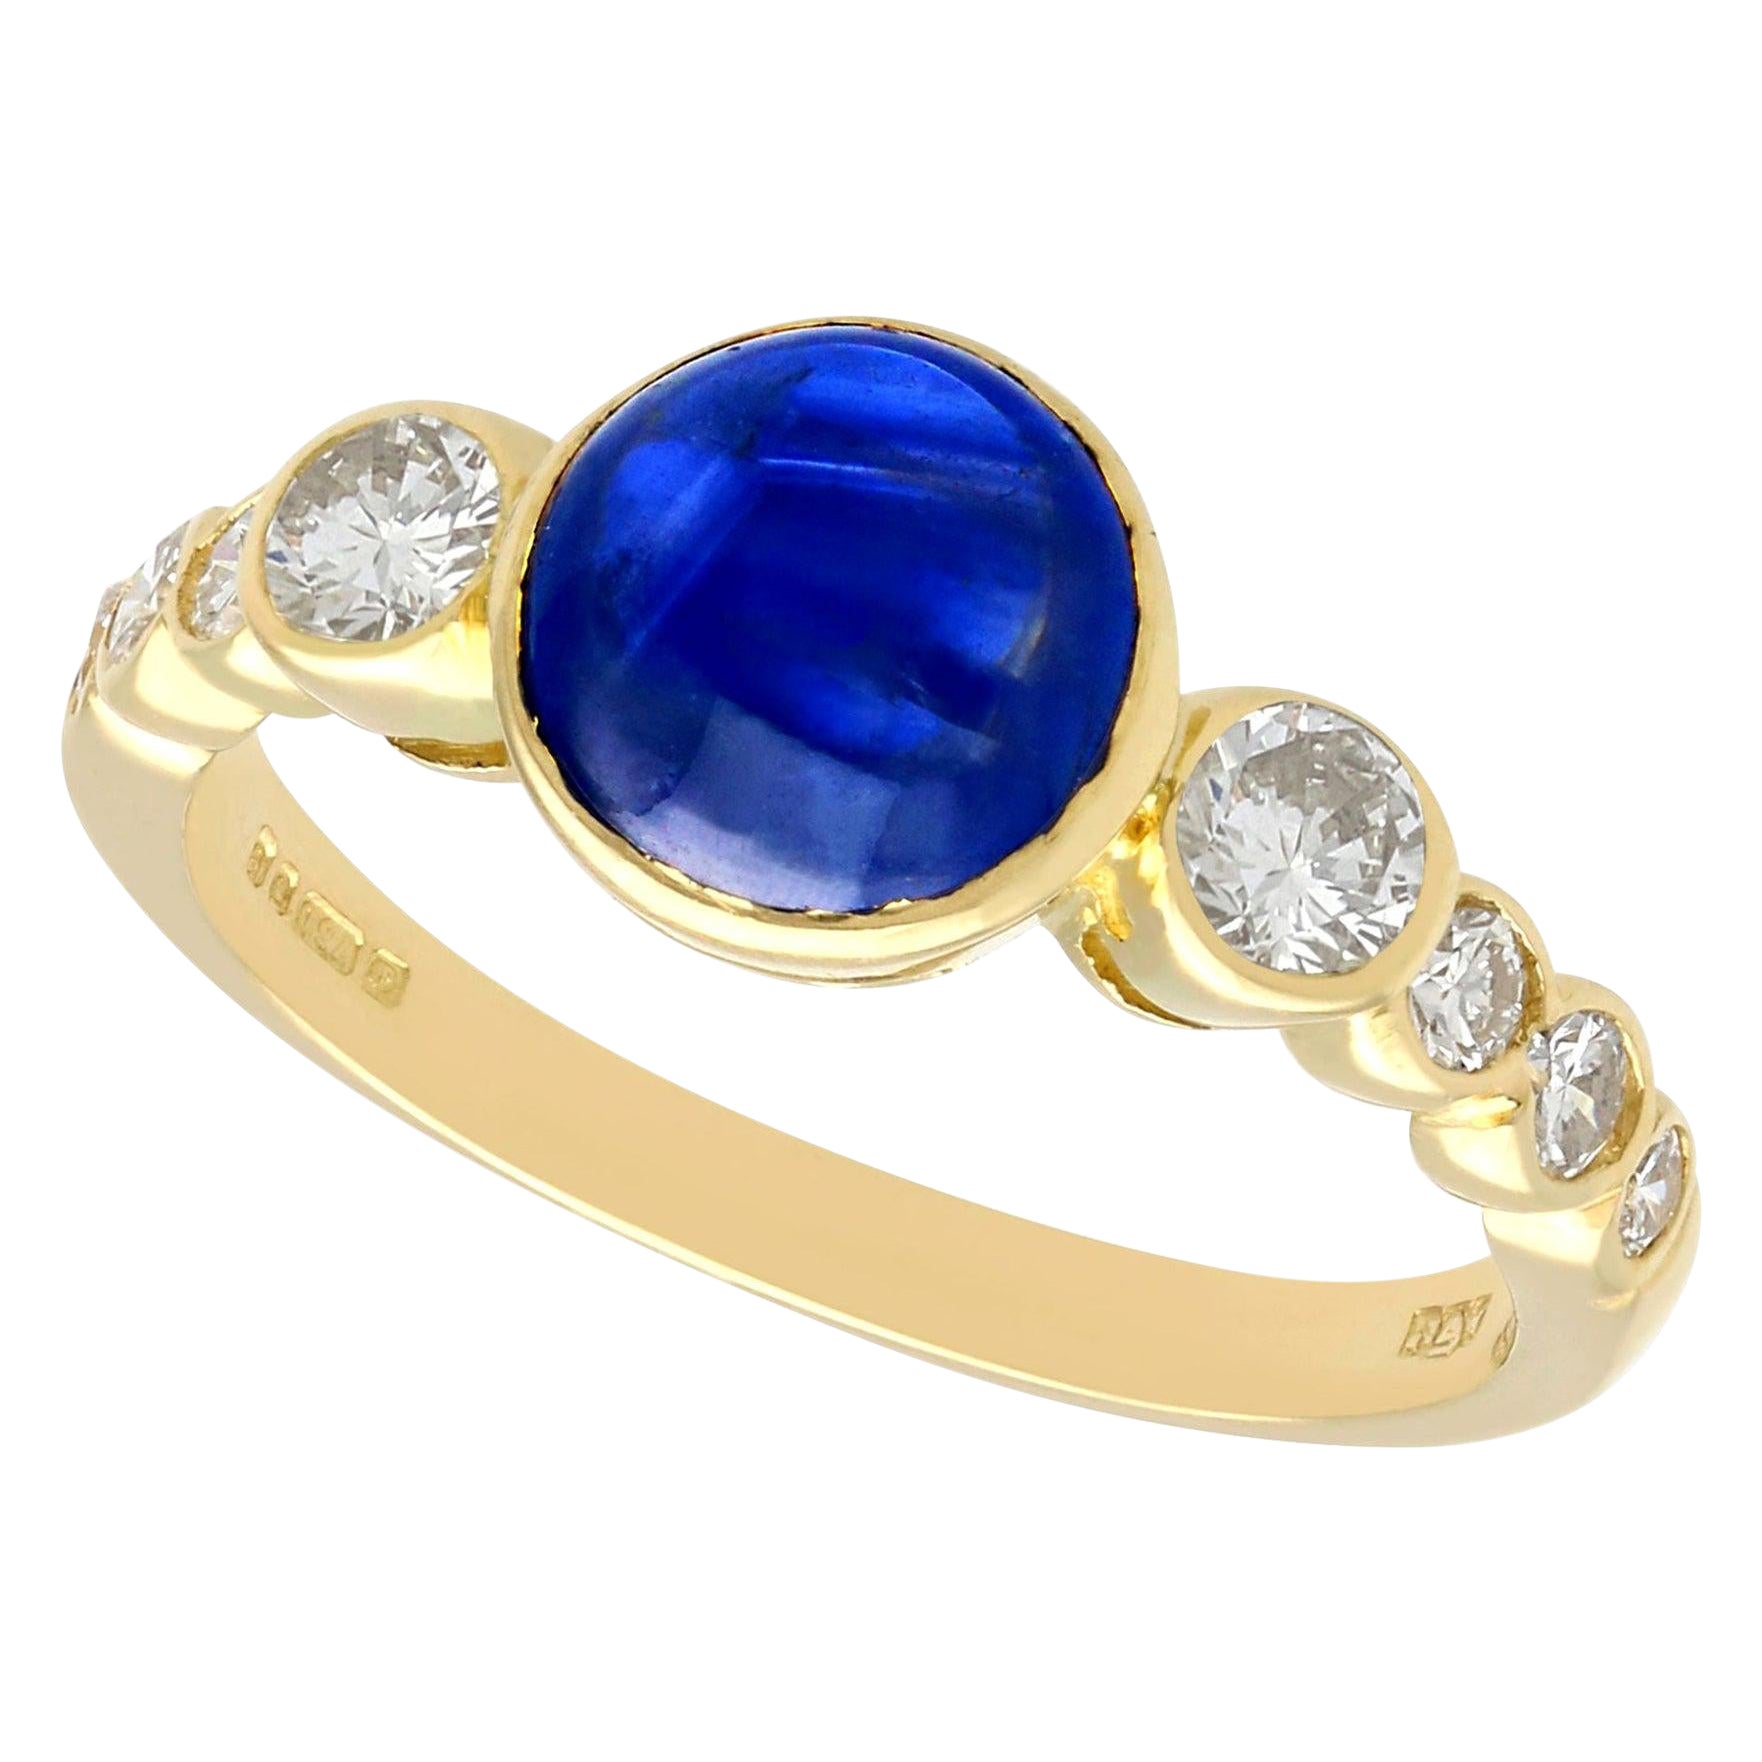 Vintage 1980s 1.74ct Cabochon Cut Sapphire and Diamond Yellow Gold Cocktail Ring